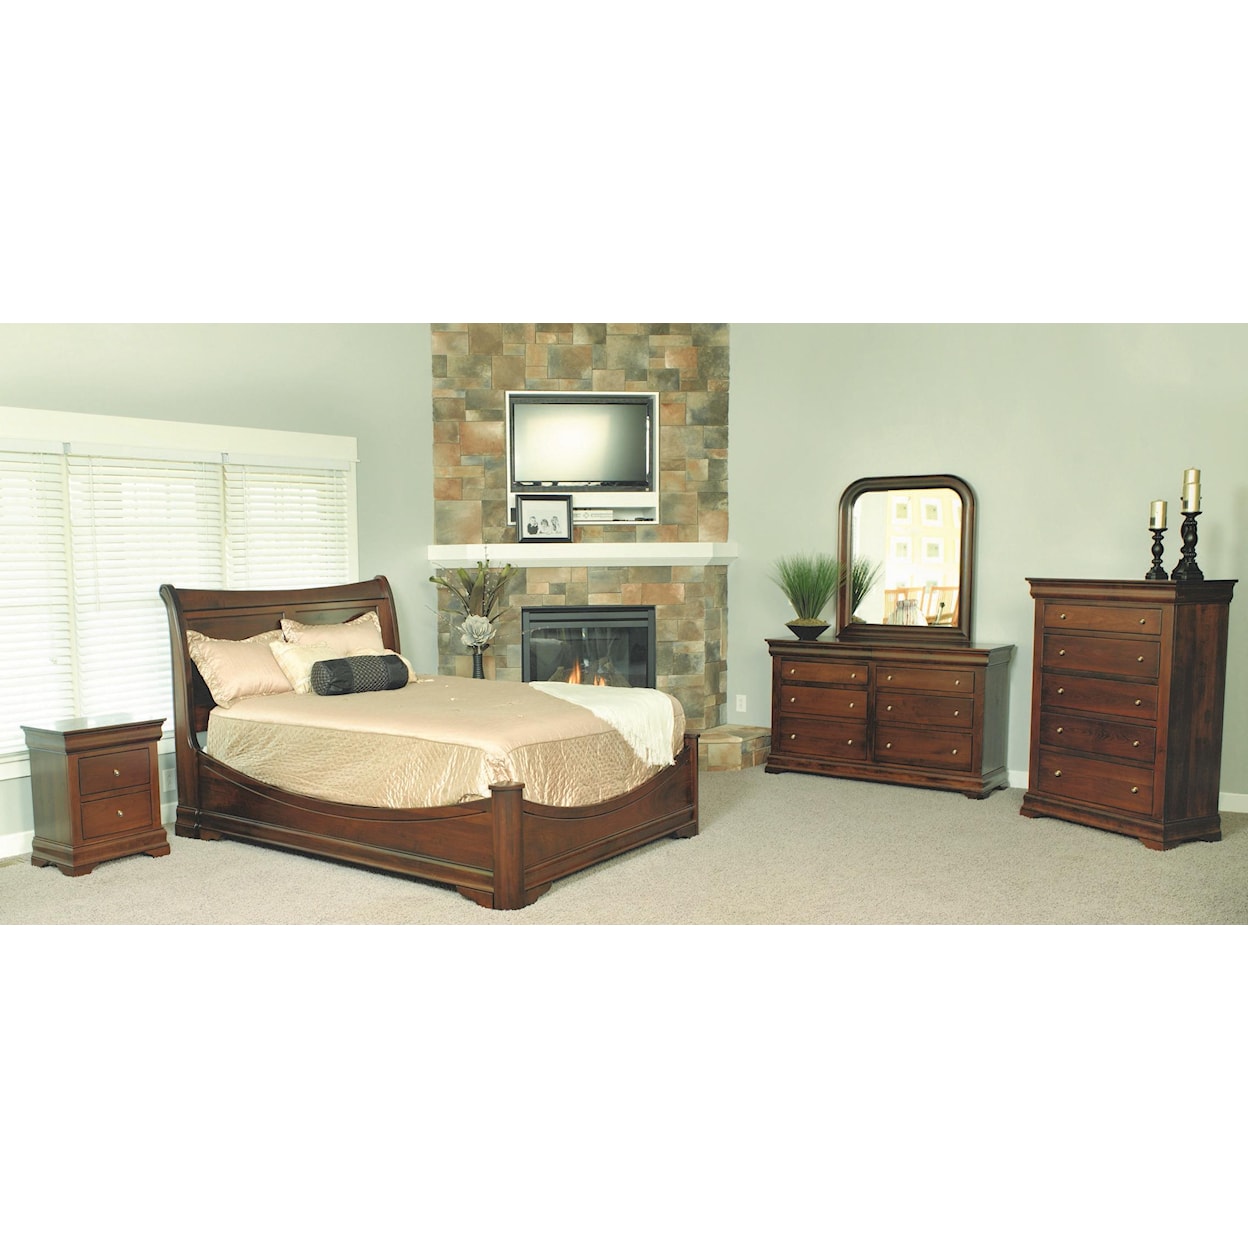 The Urban Collection Bordeaux Sleigh Bed